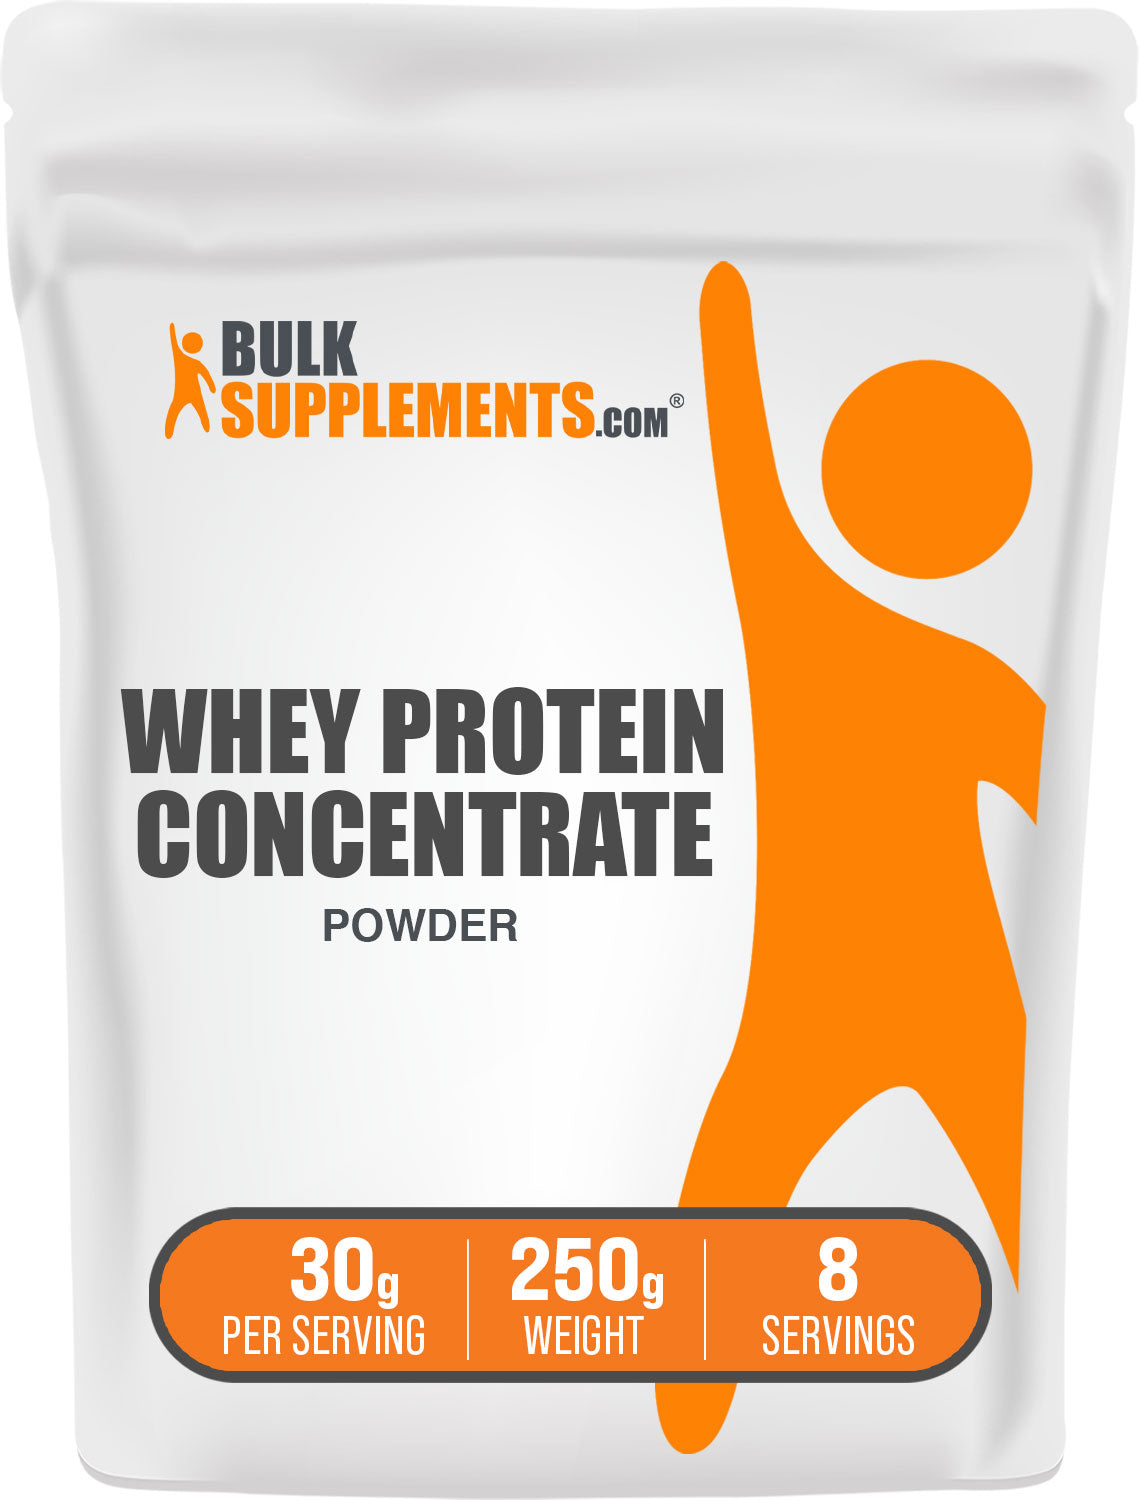 BulkSupplements Whey Protein Concentrate 80% Powder 250g bag